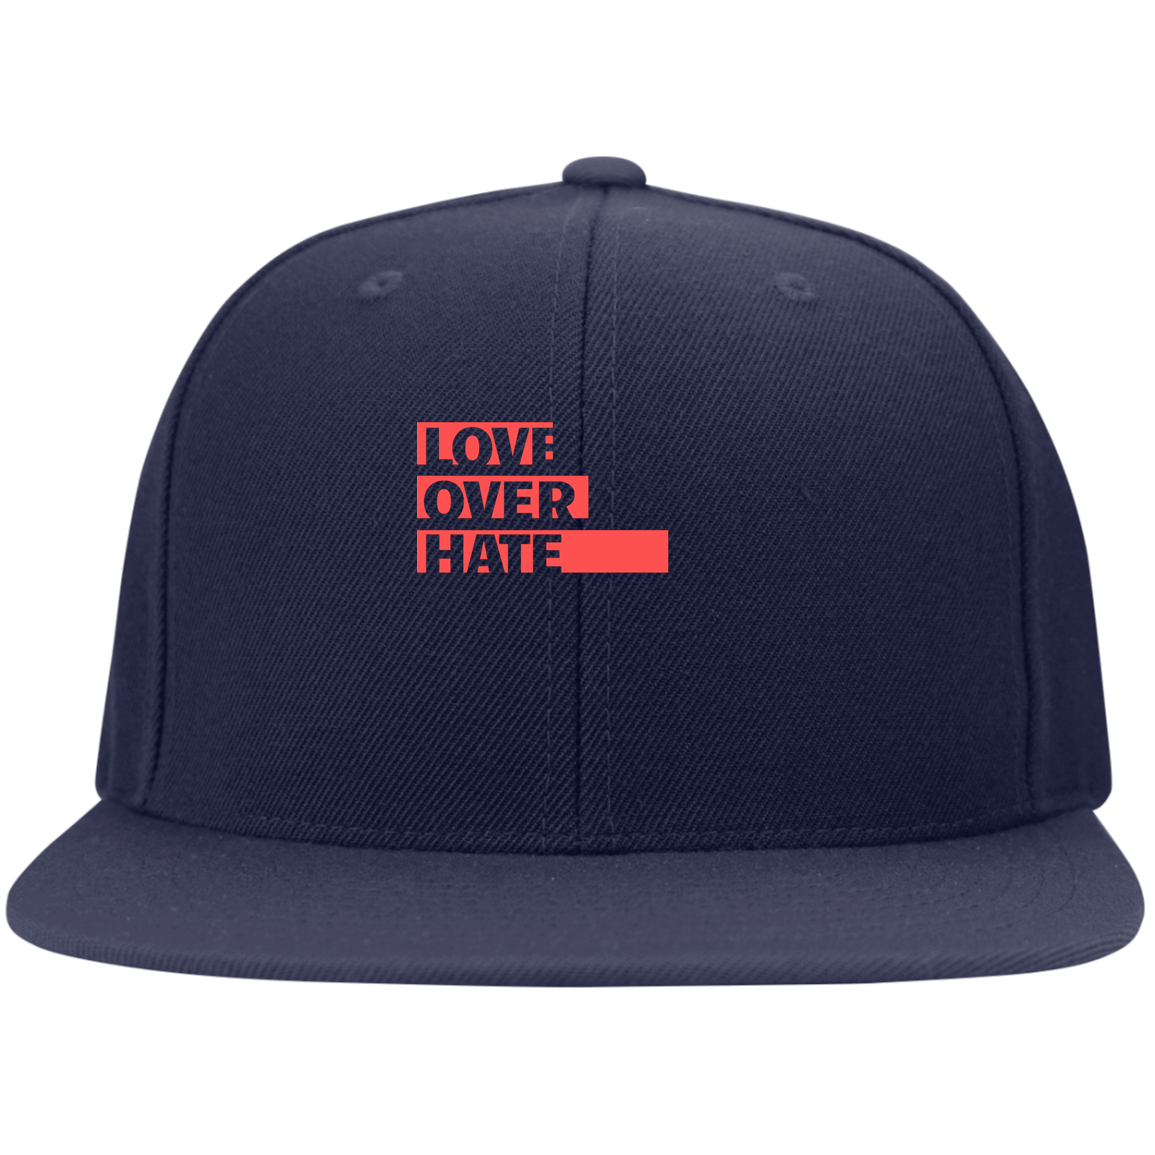 Love Over Hate Snapback Hat